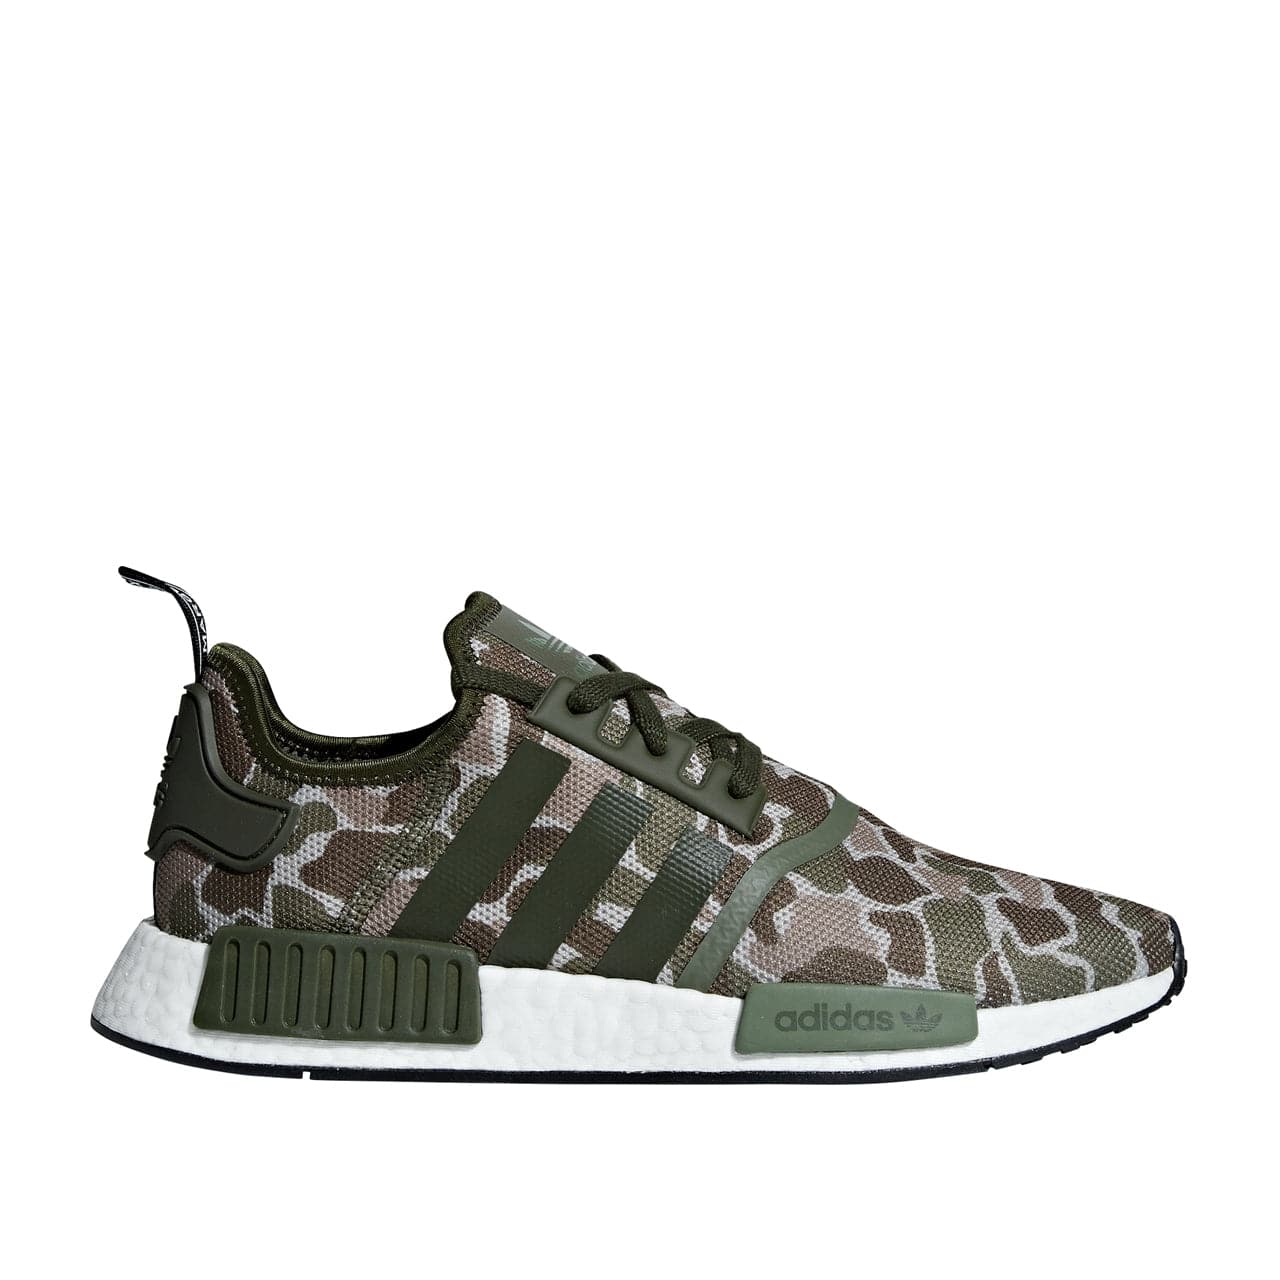 adidas NMD_R1 (Olive)  - Allike Store